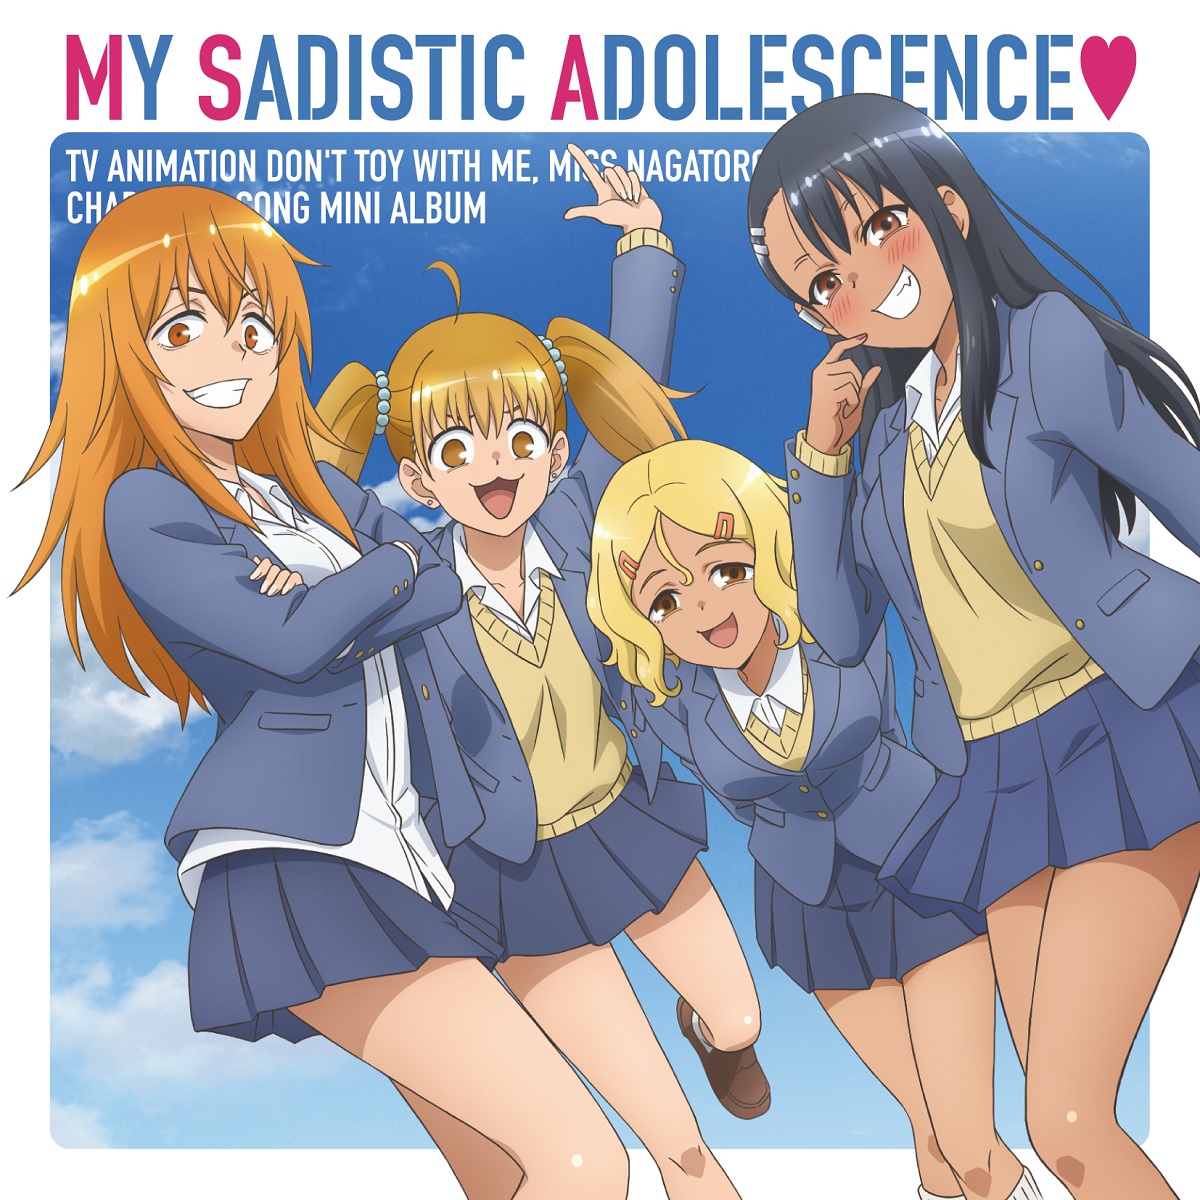 Cover art for『Nagatoro-san (Sumire Uesaka) - Play Your Heart』from the release『MY SADISTIC ADOLESCENCE♡』